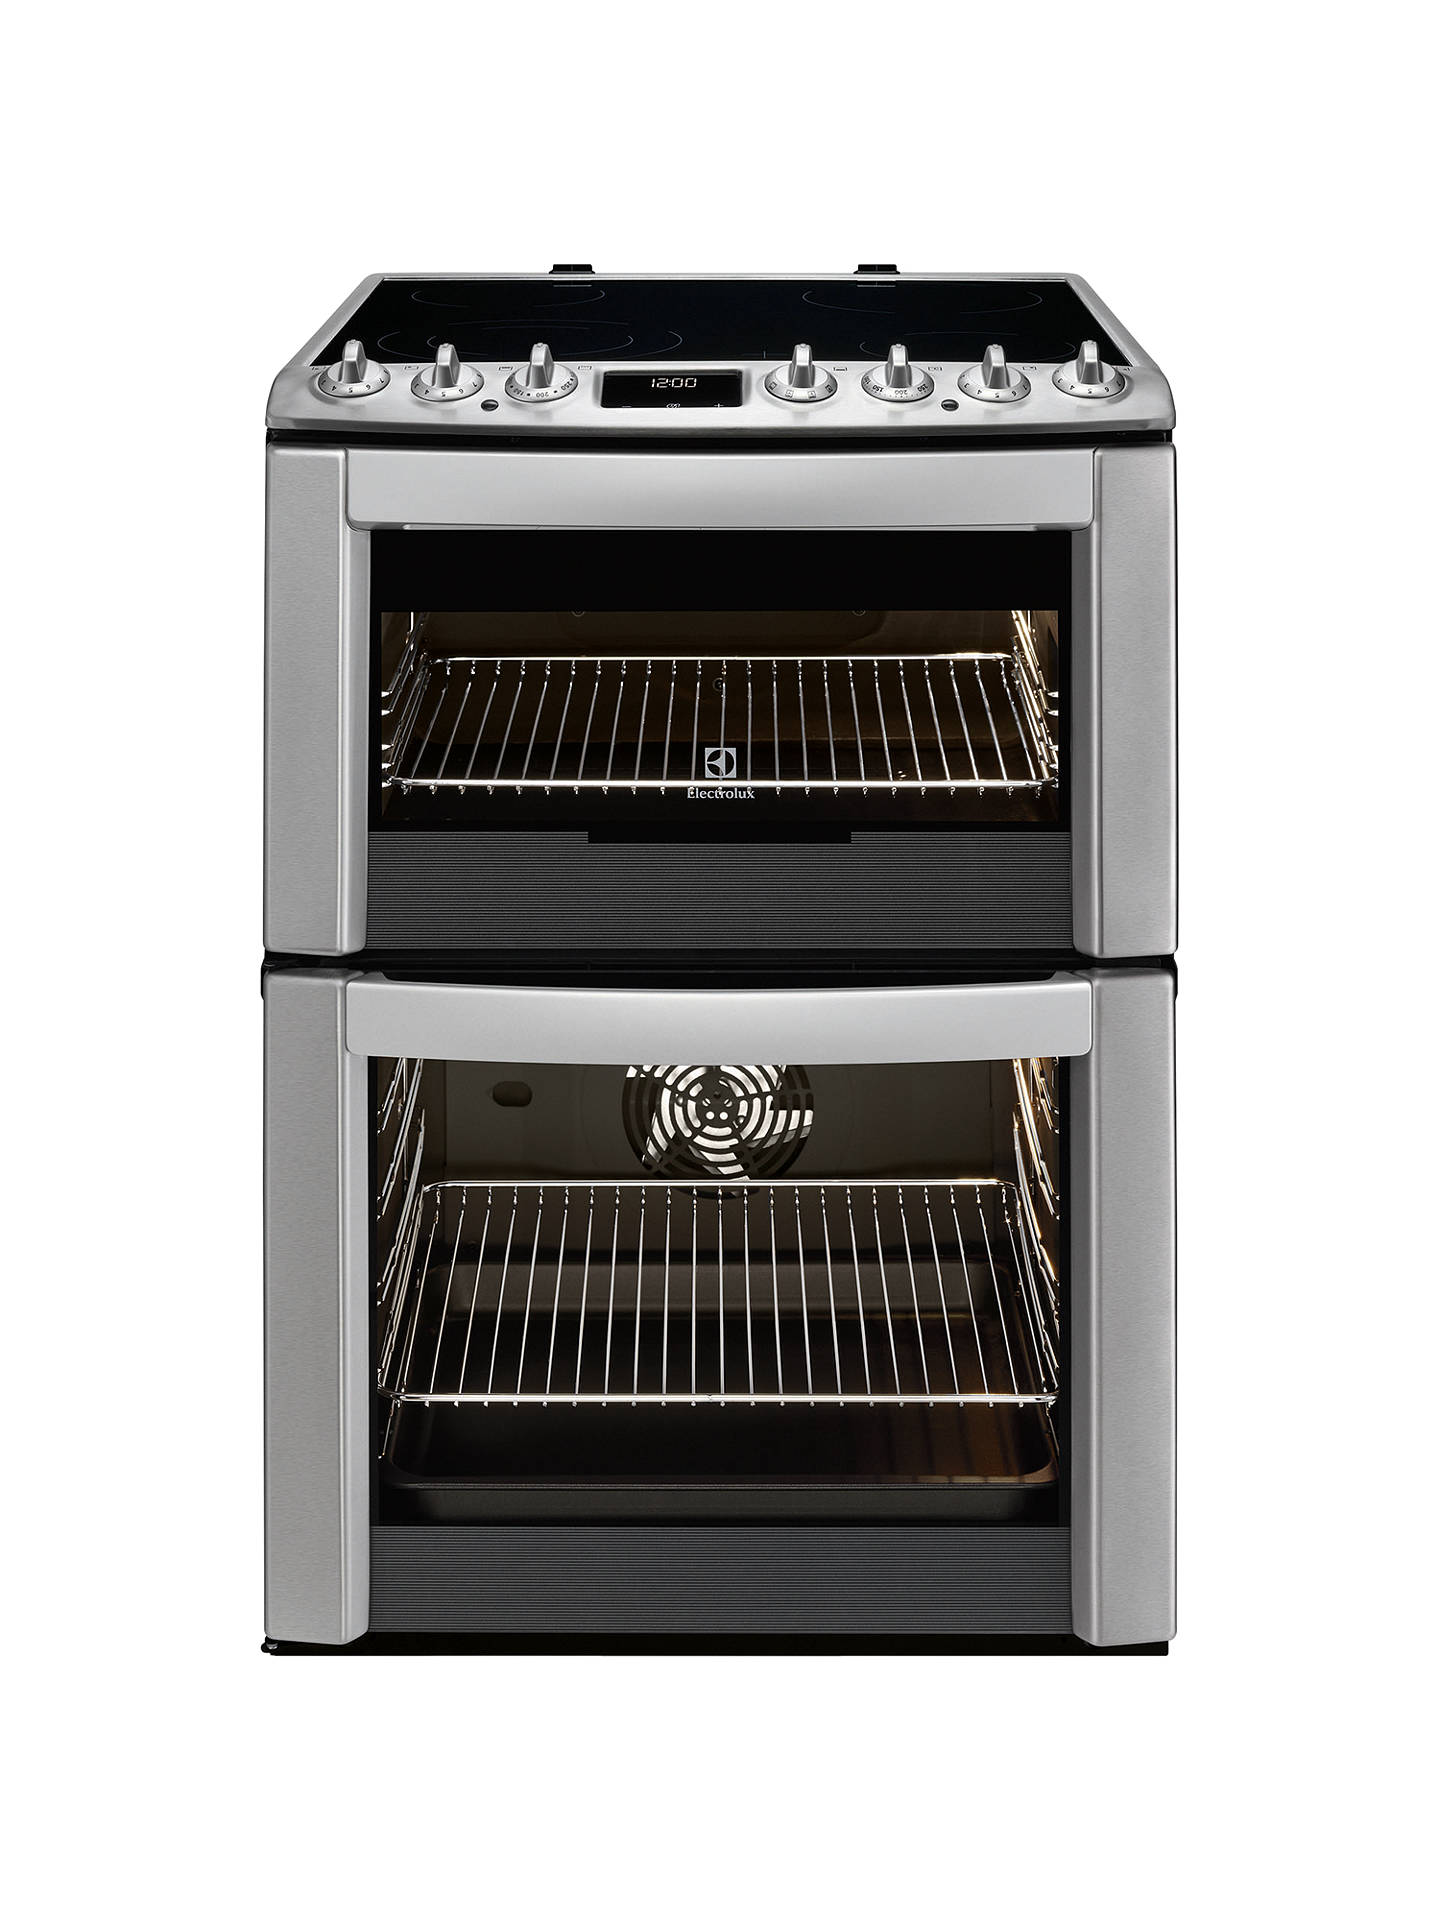 Electrolux EKC6562AOX Electric Cooker, Stainless Steel at John Lewis